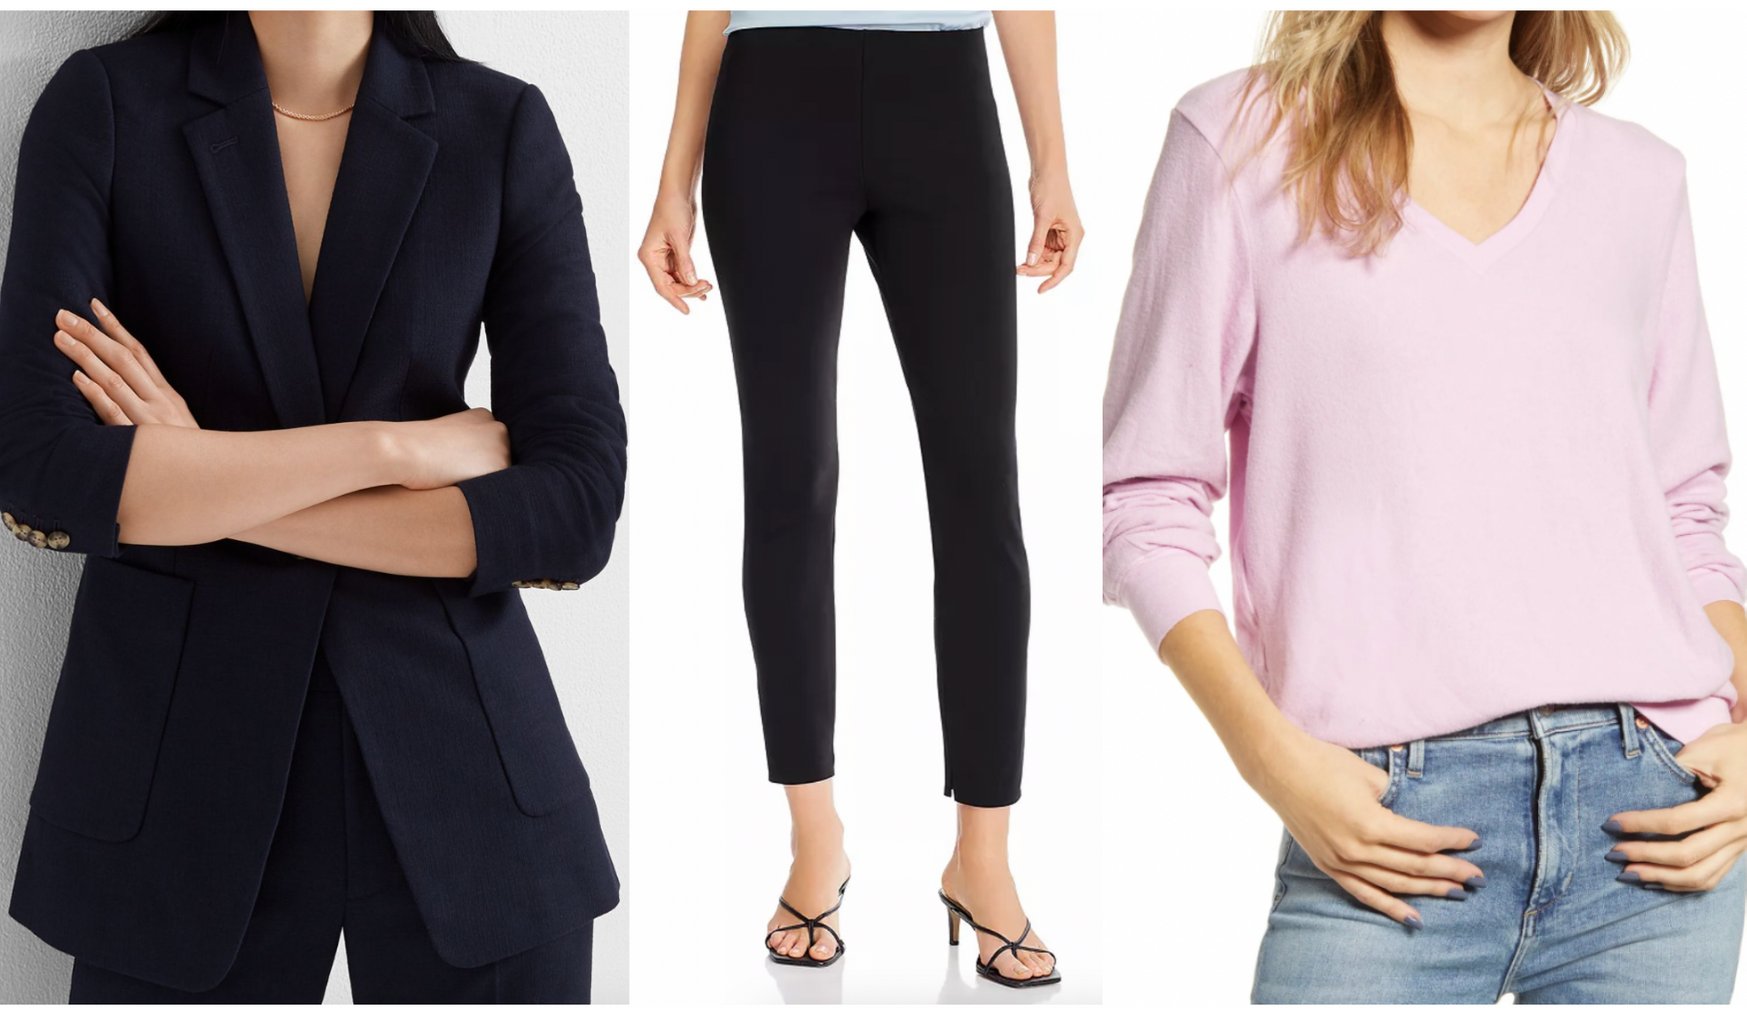 5 Ways You Can Choose Comfort and Style